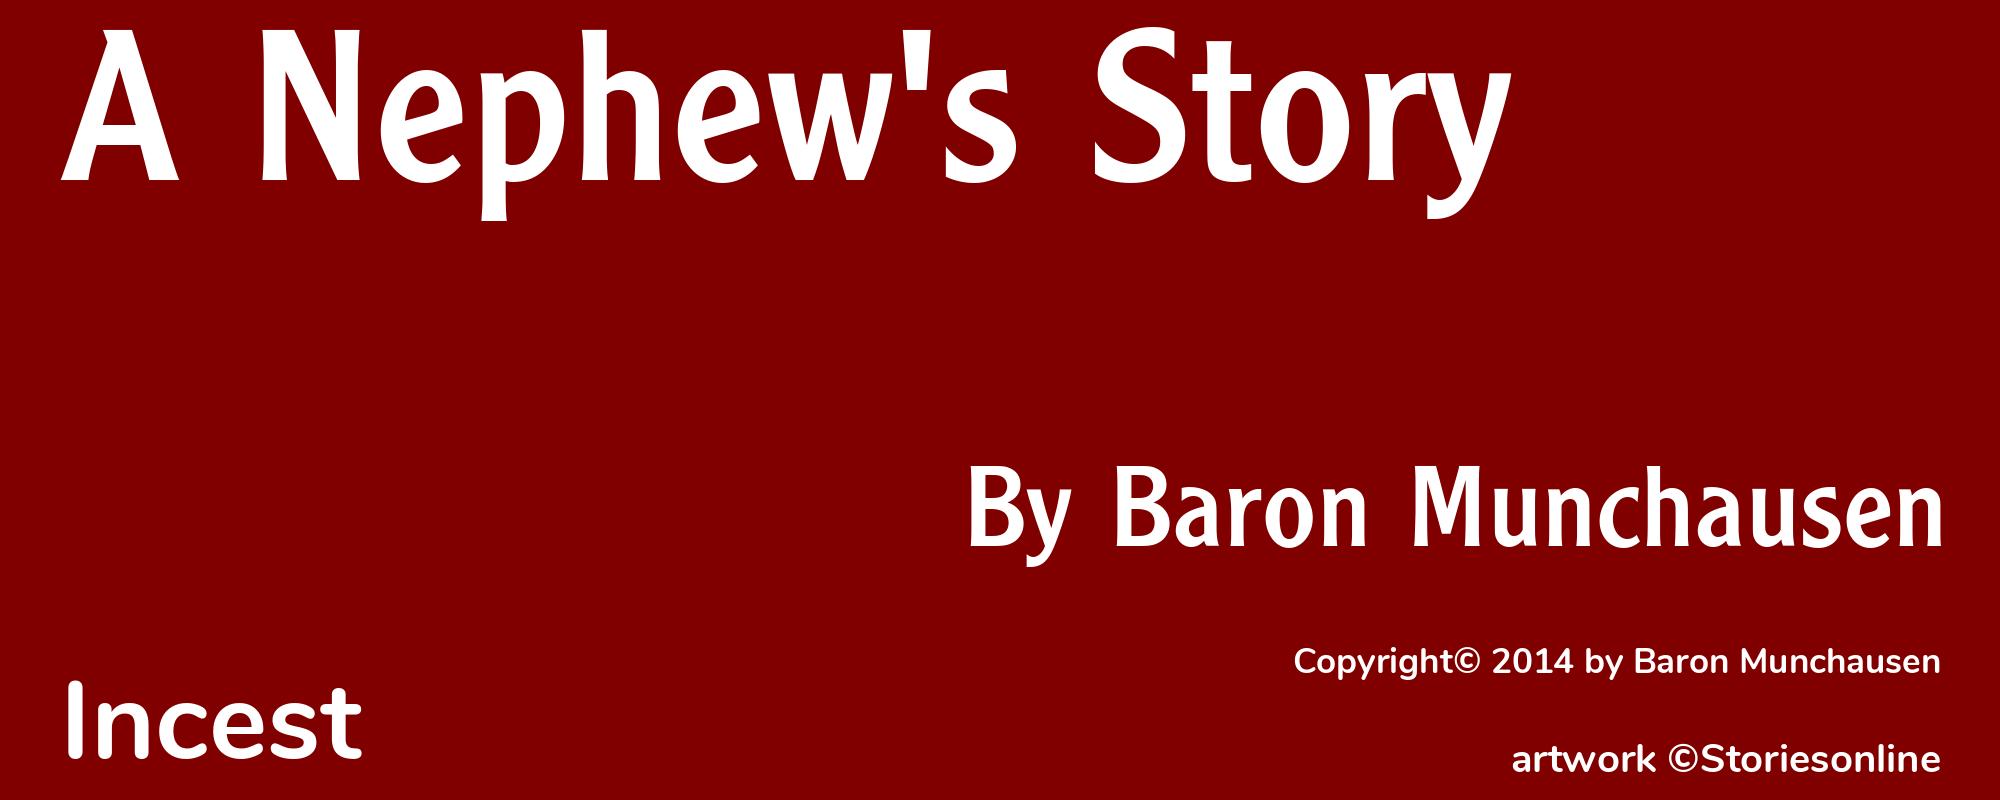 A Nephew's Story - Cover